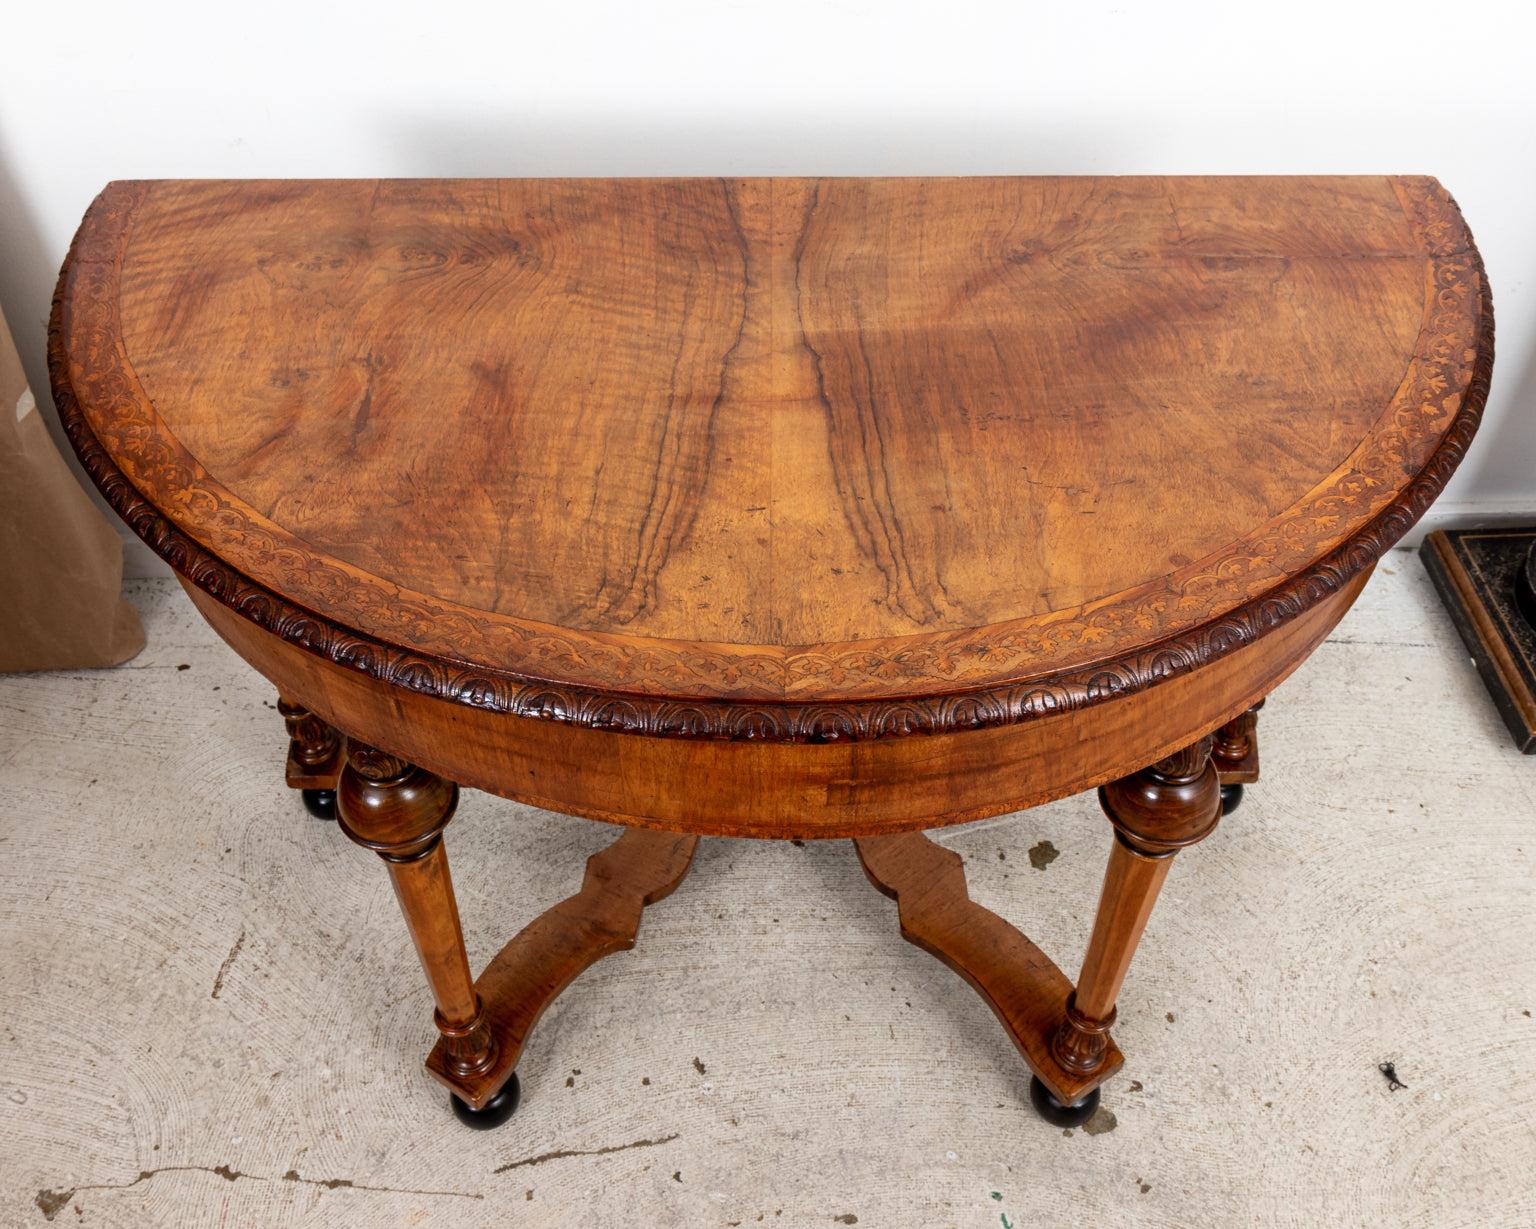 Circa 1900s William & Mary style Walnut demilune table with carved wood detailing and inlay work throughout. The skirt is detailed with carved foliage trim while the edge of the tabletop is crafted with foliage inlay in a similar pattern. The base